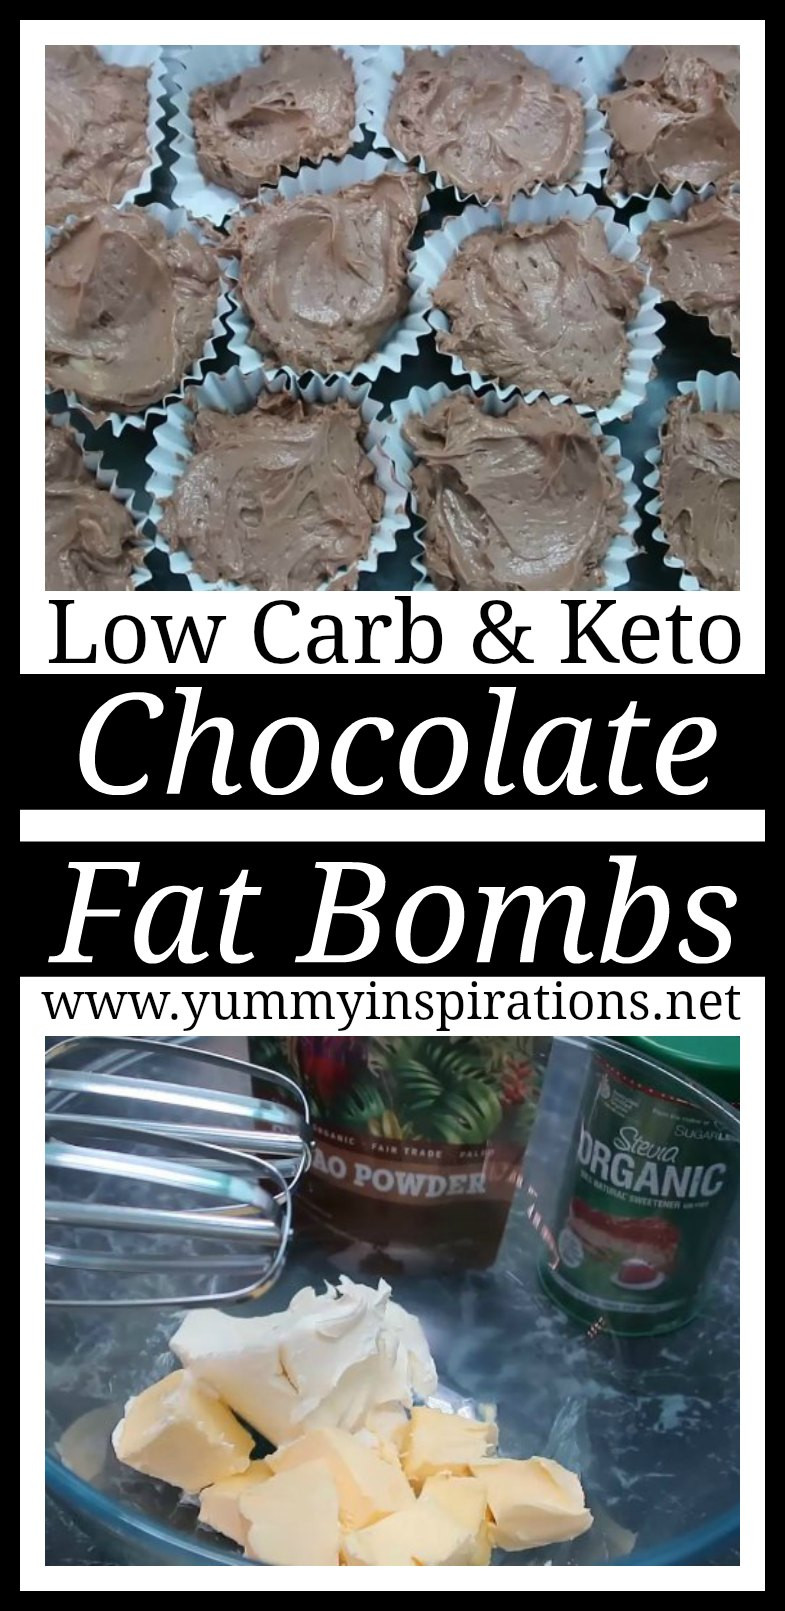 Keto Diet Recipes Fat Bombs
 Chocolate Cheesecake Fat Bombs Recipe With Cream Cheese